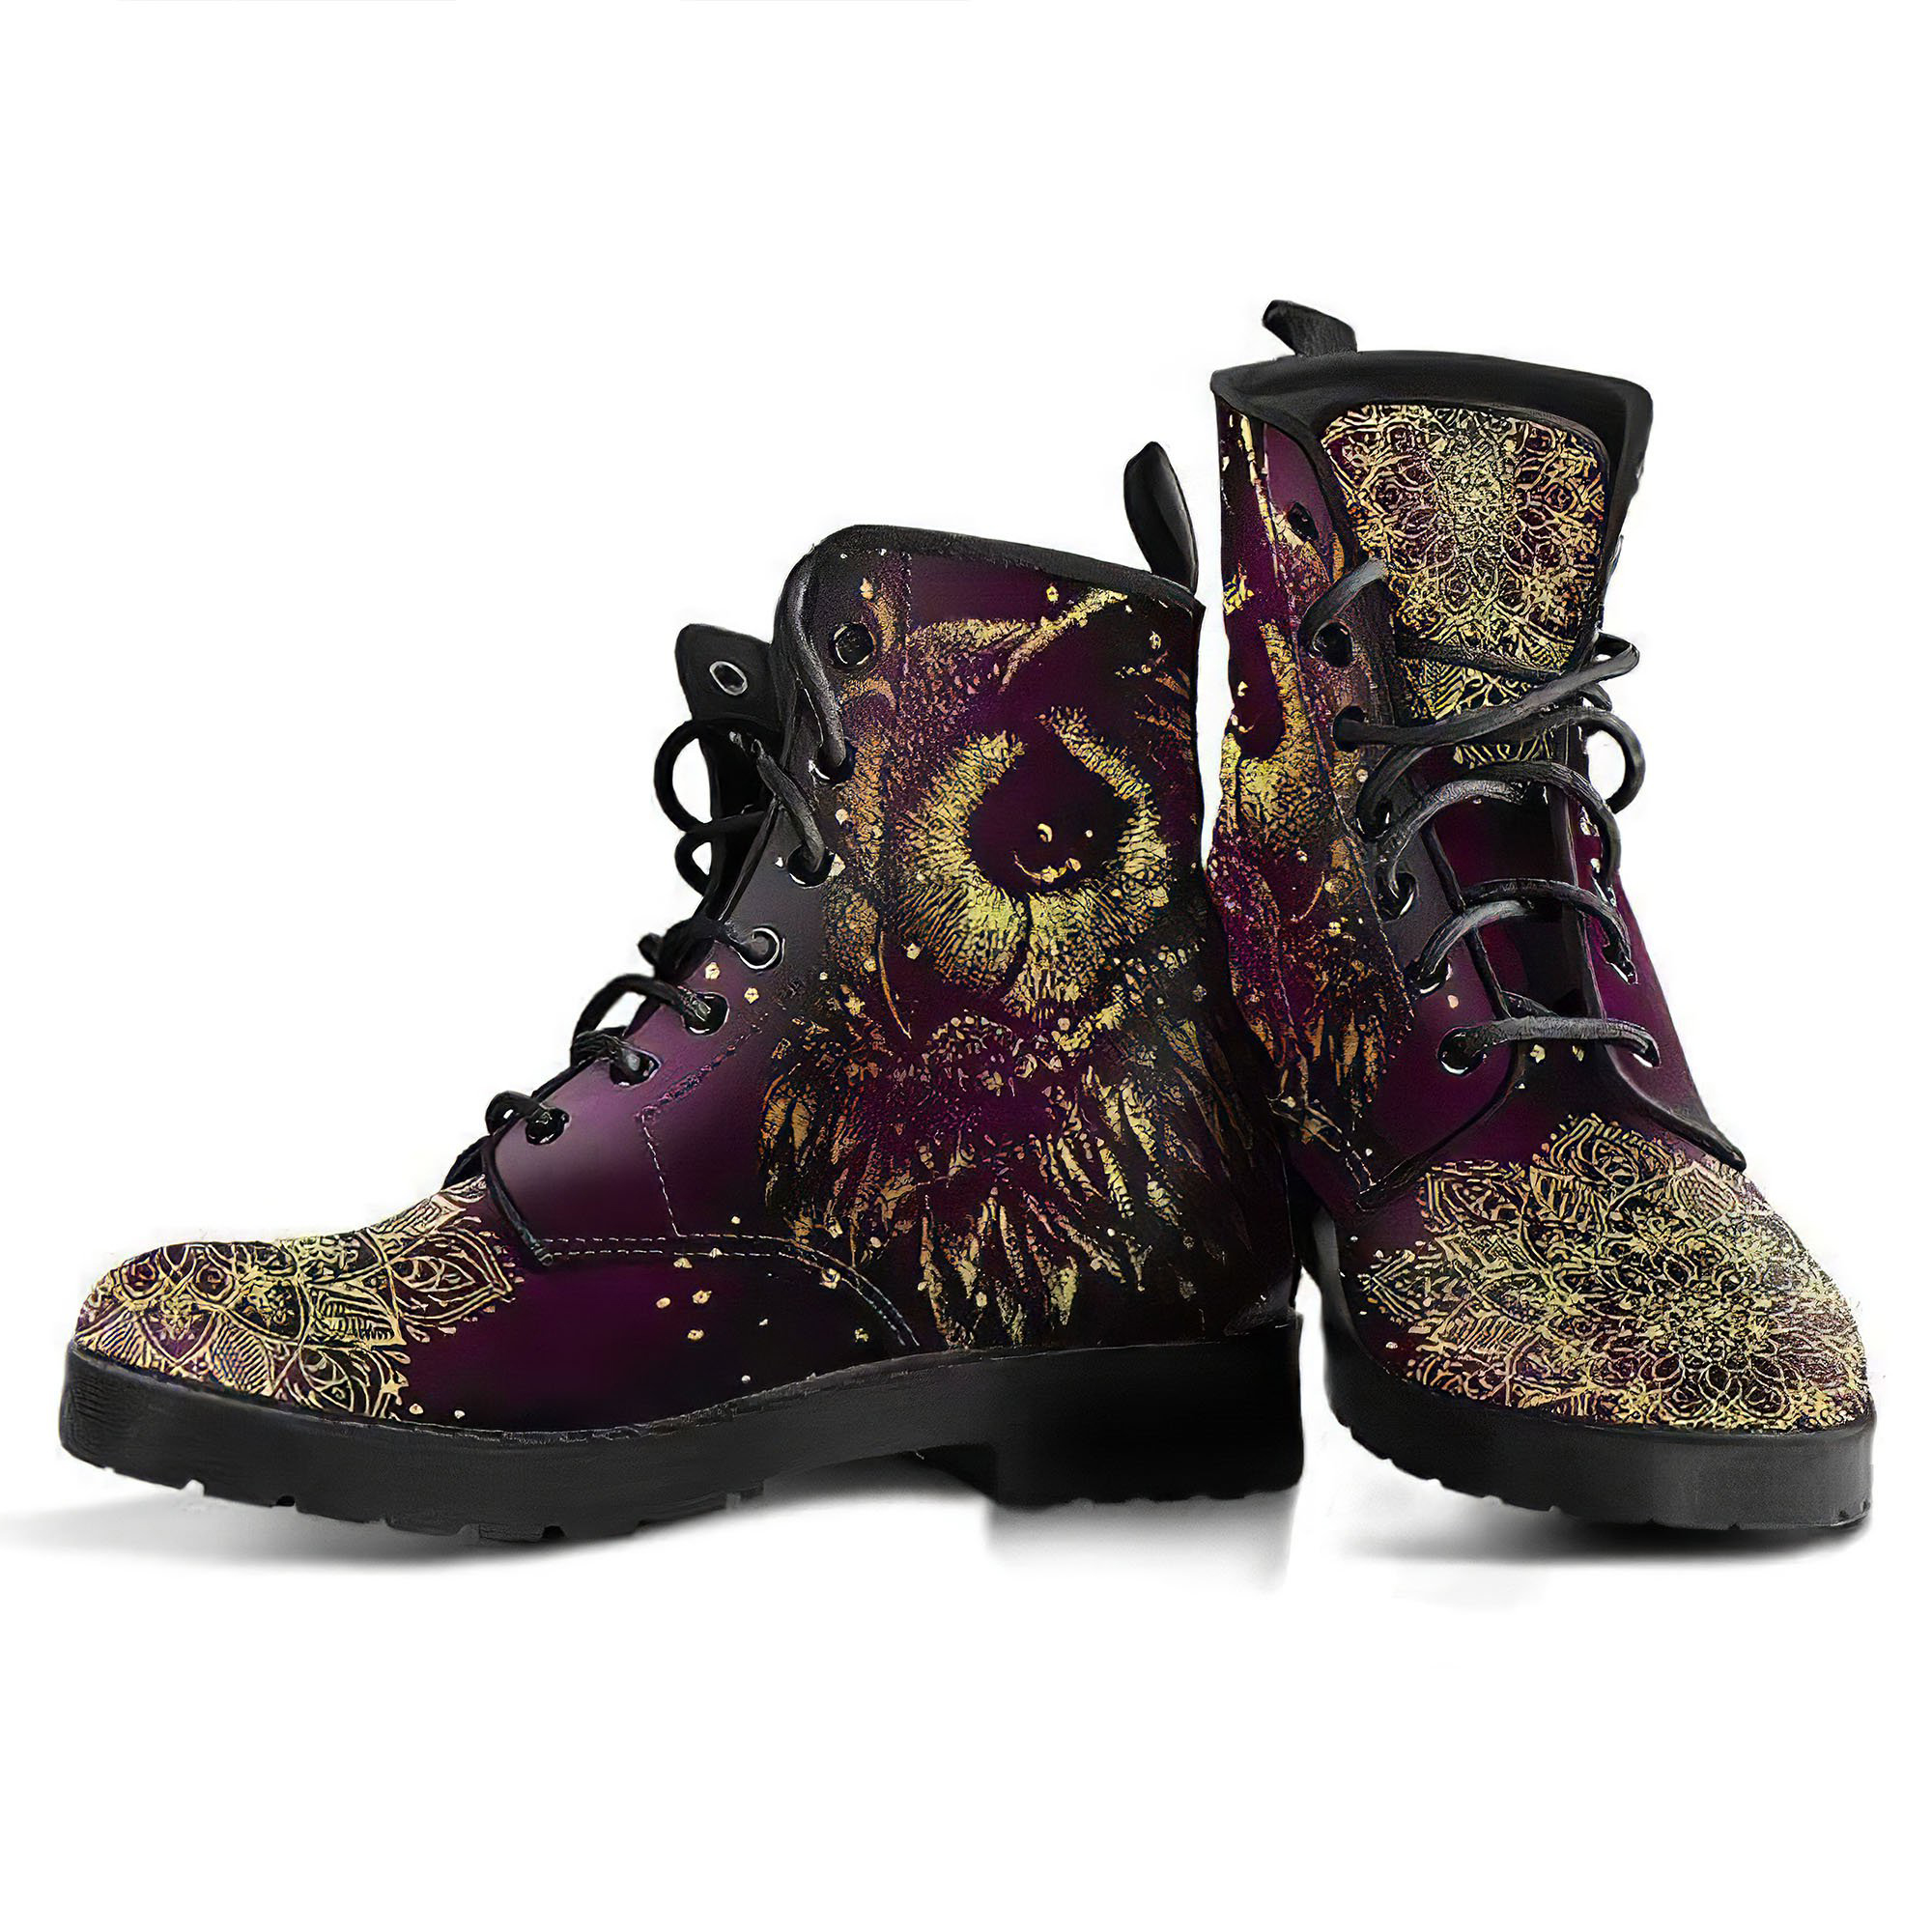 owl-1-handcrafted-boots-1-gp-main.jpg